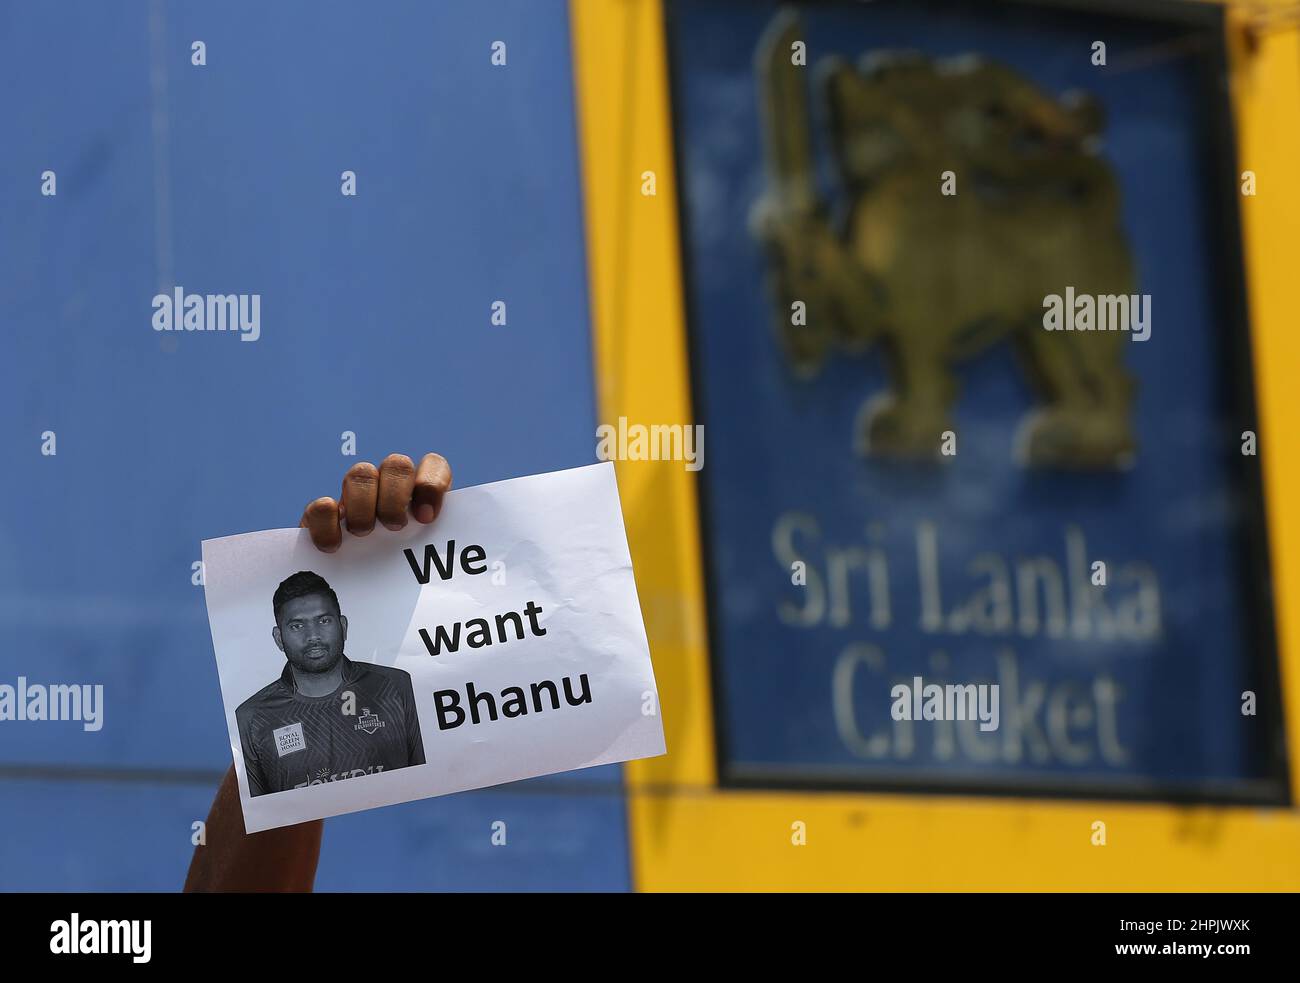 February 22, 2022, colombo, western, Sri Lanka: Sri Lankan cricket fan's protest in front of the Cricket Board Headquarters in Colombo on February 22, 2022. protested against the removal of Bhanuka Rajapaksa from the upcoming T20 series between India and Sri Lanka at the last minute. (Credit Image: © Pradeep Dambarage/ZUMA Press Wire) Stock Photo